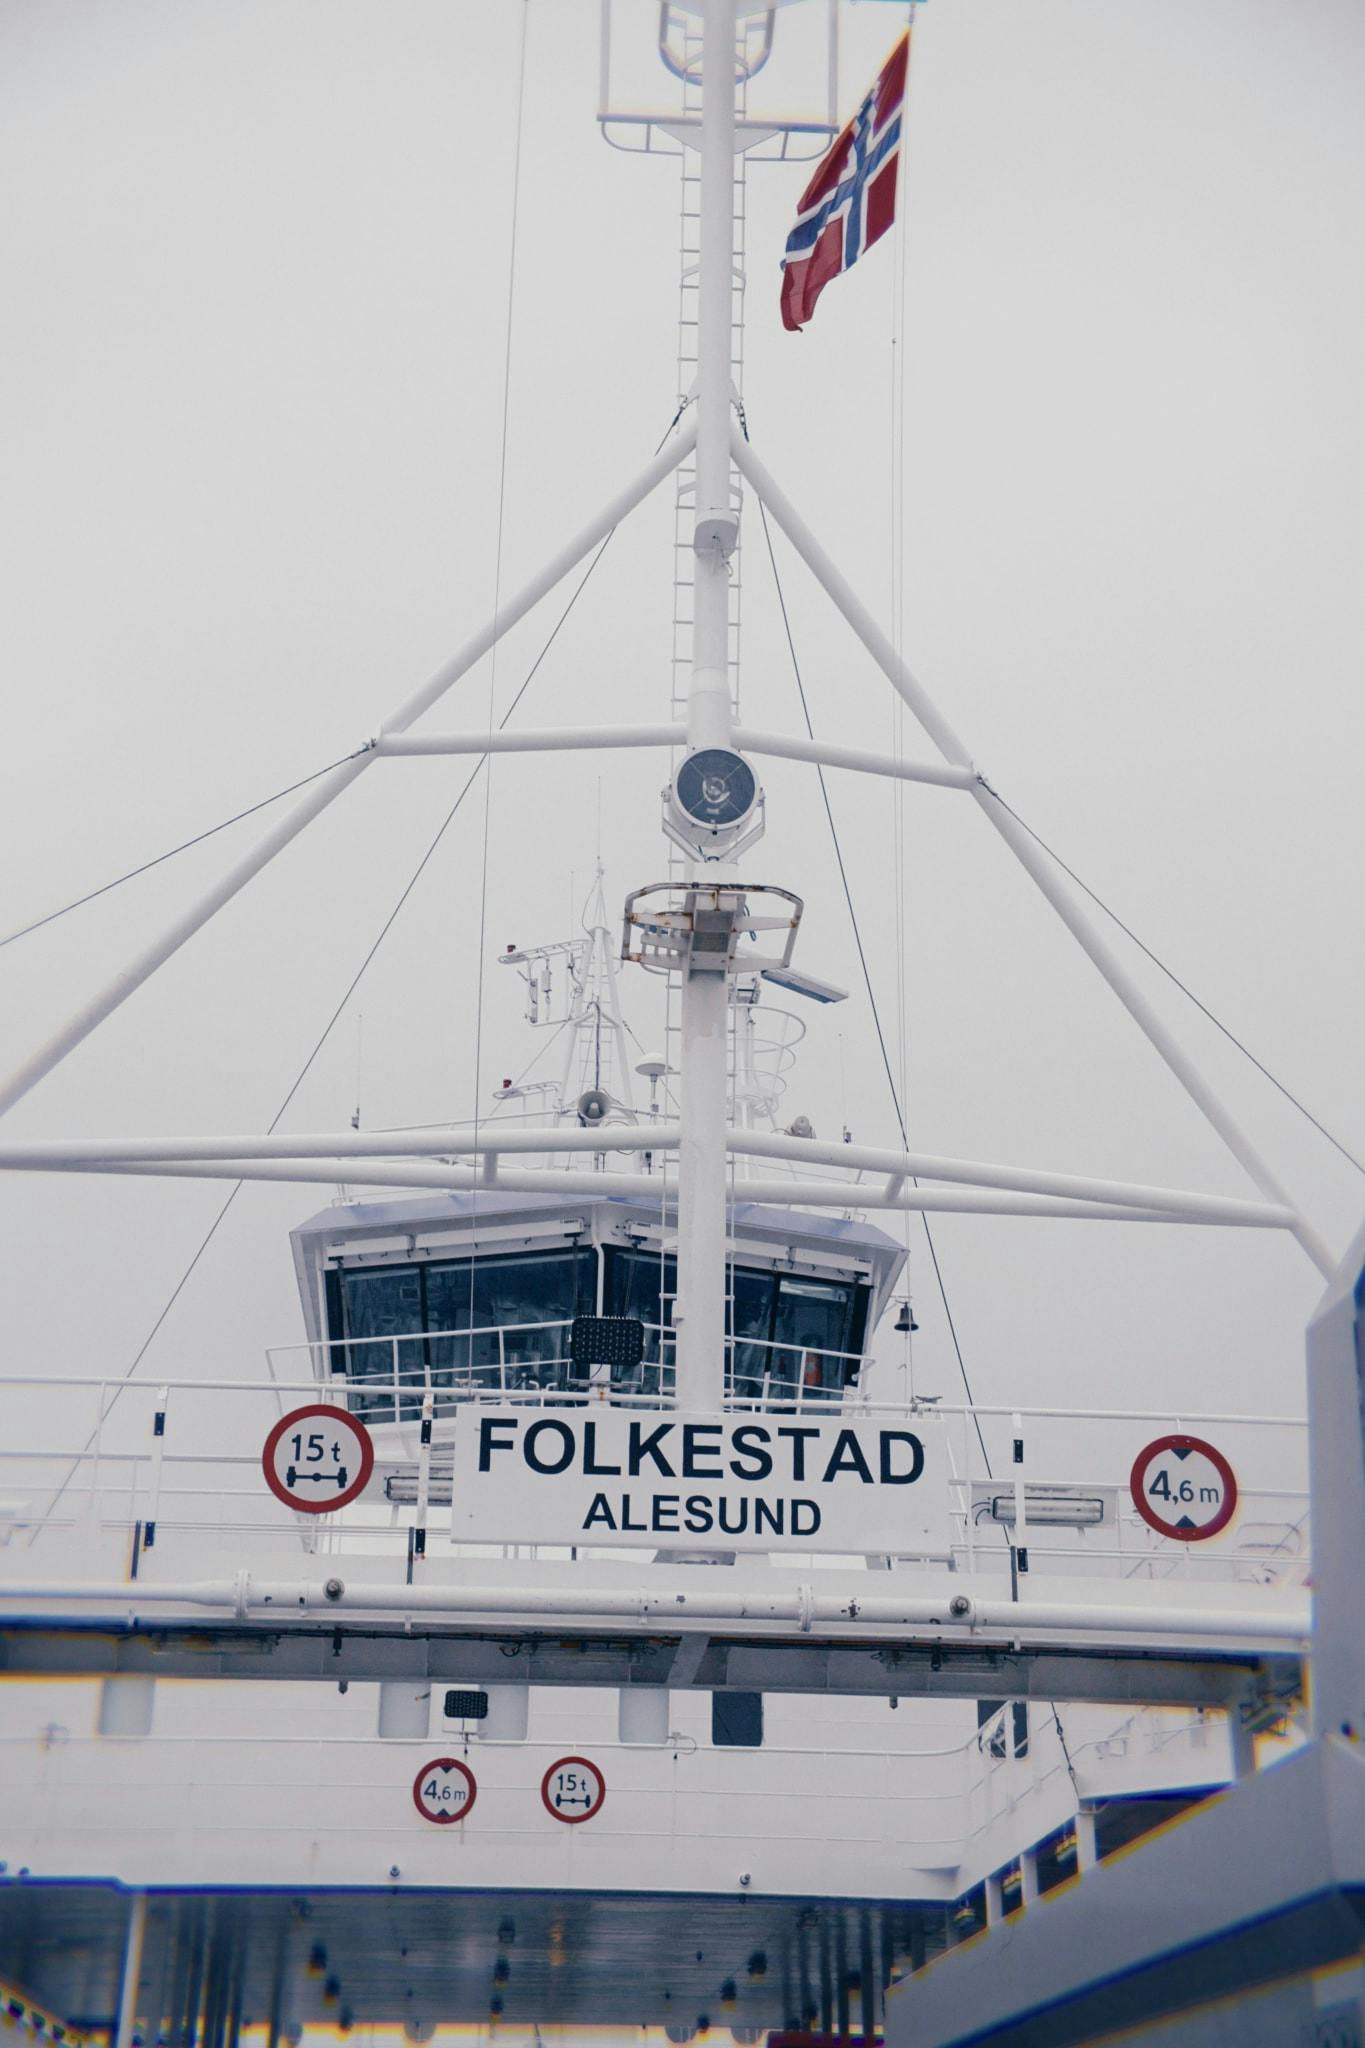 A photo of a ferry marked "Folkestad"